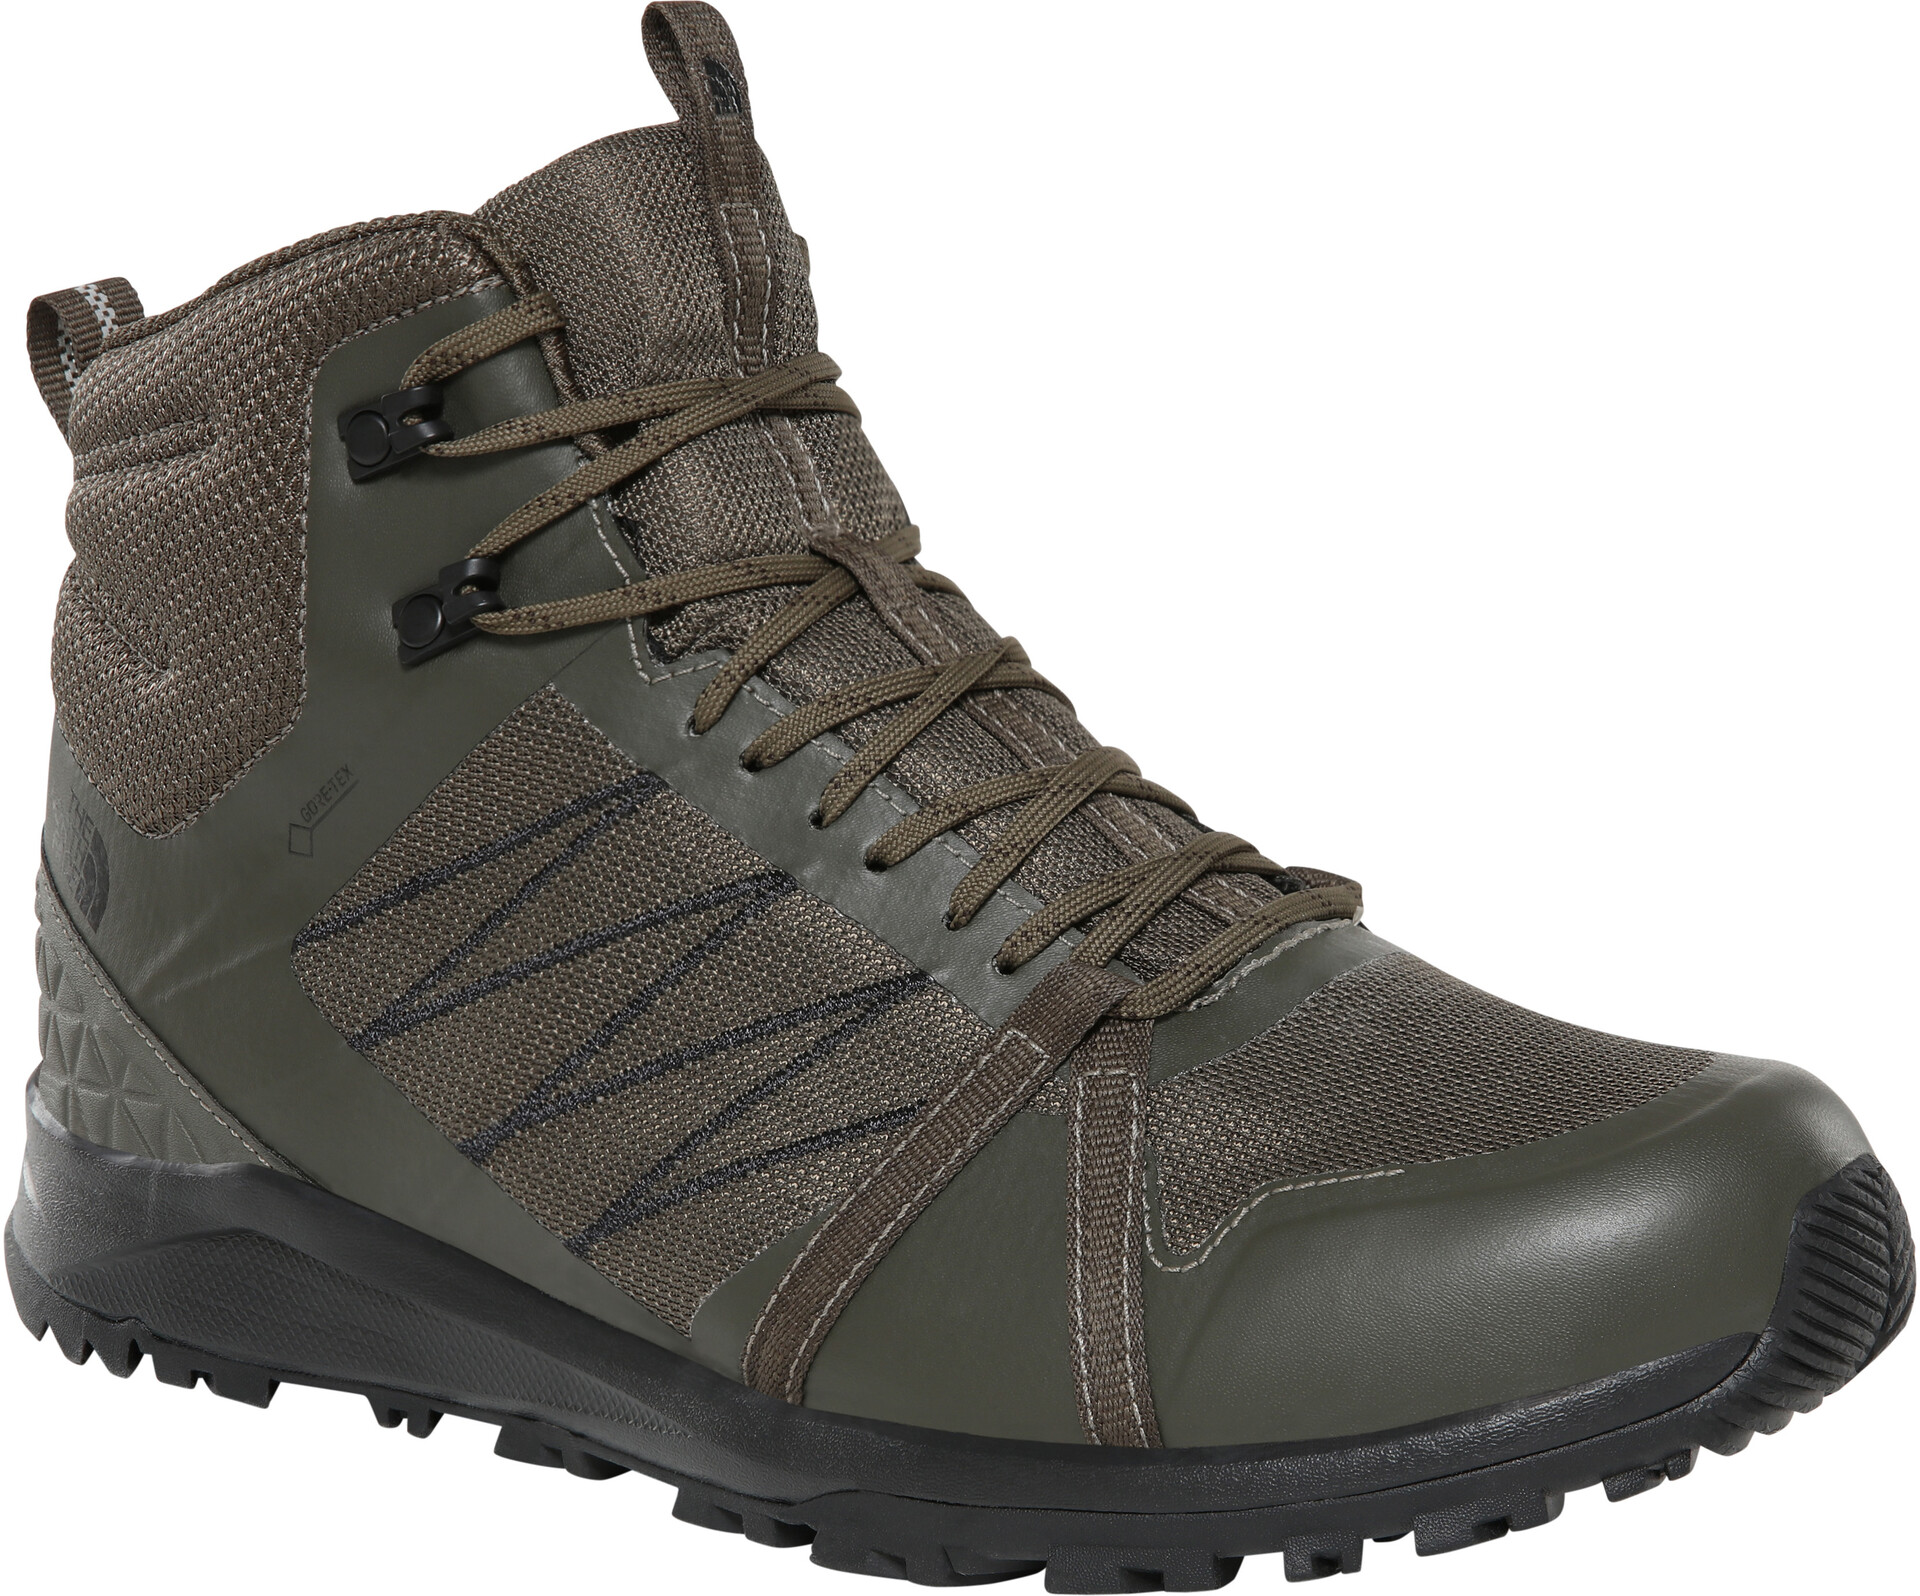 The North Face Litewave Fastpack II Mid 